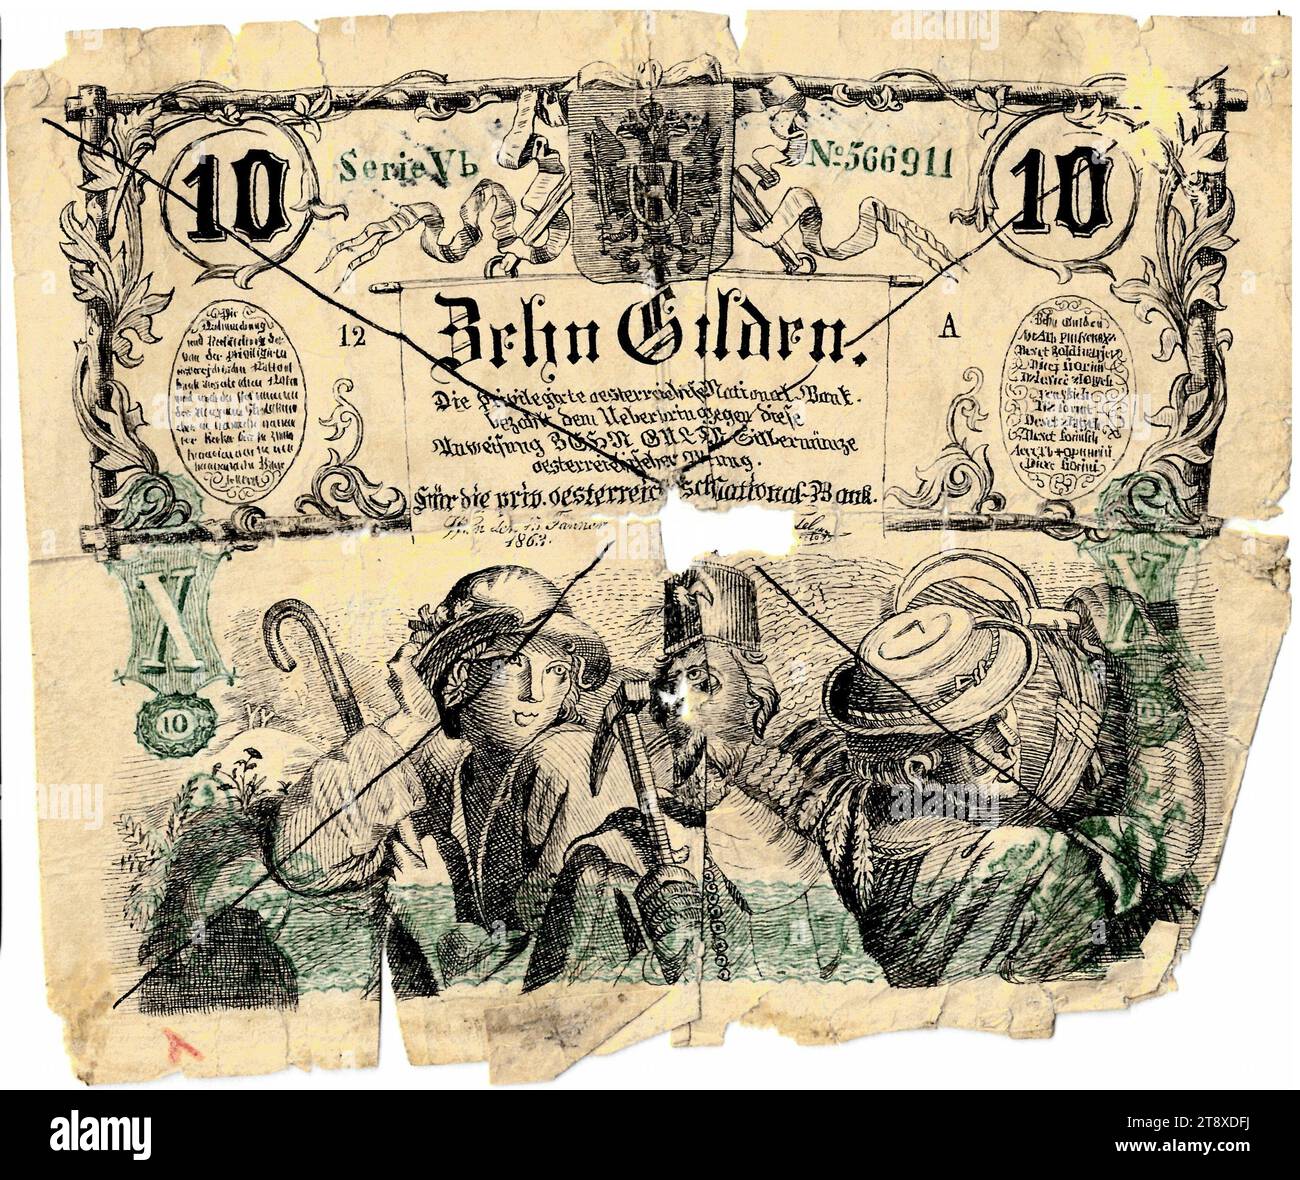 Banknote (forgery), 10 florins, Privilegierte Österreichische National-Bank, mint authority, Date after 15.01.1863, paper, printing, width 137 mm, height 116 mm, Mint, Vienna, Mint territory, Austria, Empire (1804-1867), Finance, counterfeit, forgery, farmers, working class, laborers, coat of arms (as symbol of the state, etc.), bank-note, money, The Vienna Collection Stock Photo